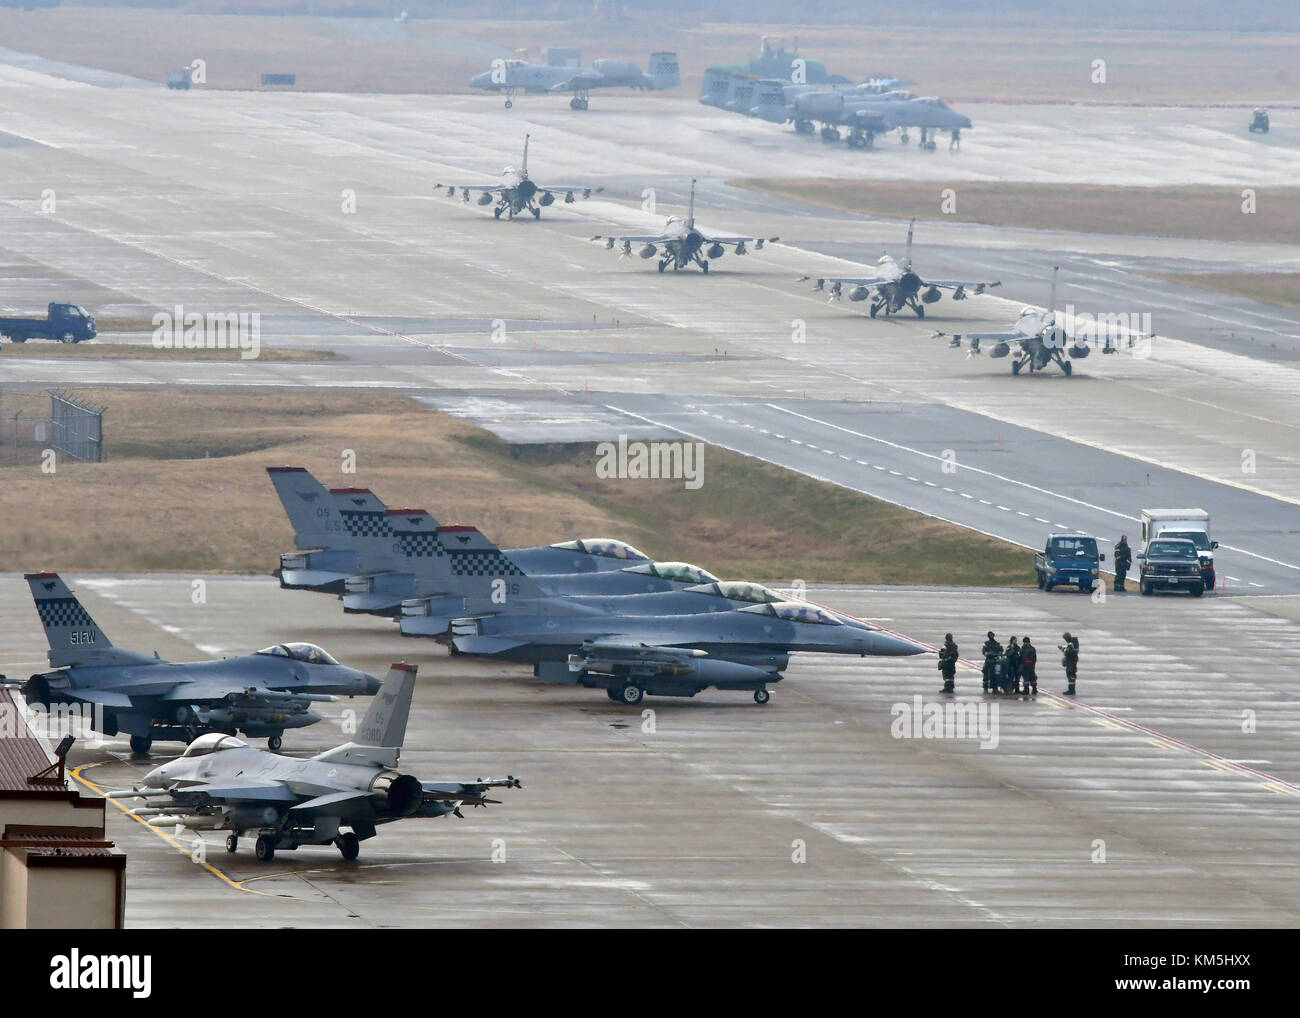 Gunsan, South Korea. 3rd Dec, 2017. U.S. Air Force F-16 Fighting Falcon aircraft, assigned to the 36th Fighter Squadron, taxis down a runway during exercise Vigilant Ace at Osan Air Base December 3, 2017 in Pyeongtaek, South Korea. Hundreds of aircraft from the United States and South Korea are taking part in the massive air exercise. Credit: Planetpix/Alamy Live News Stock Photo